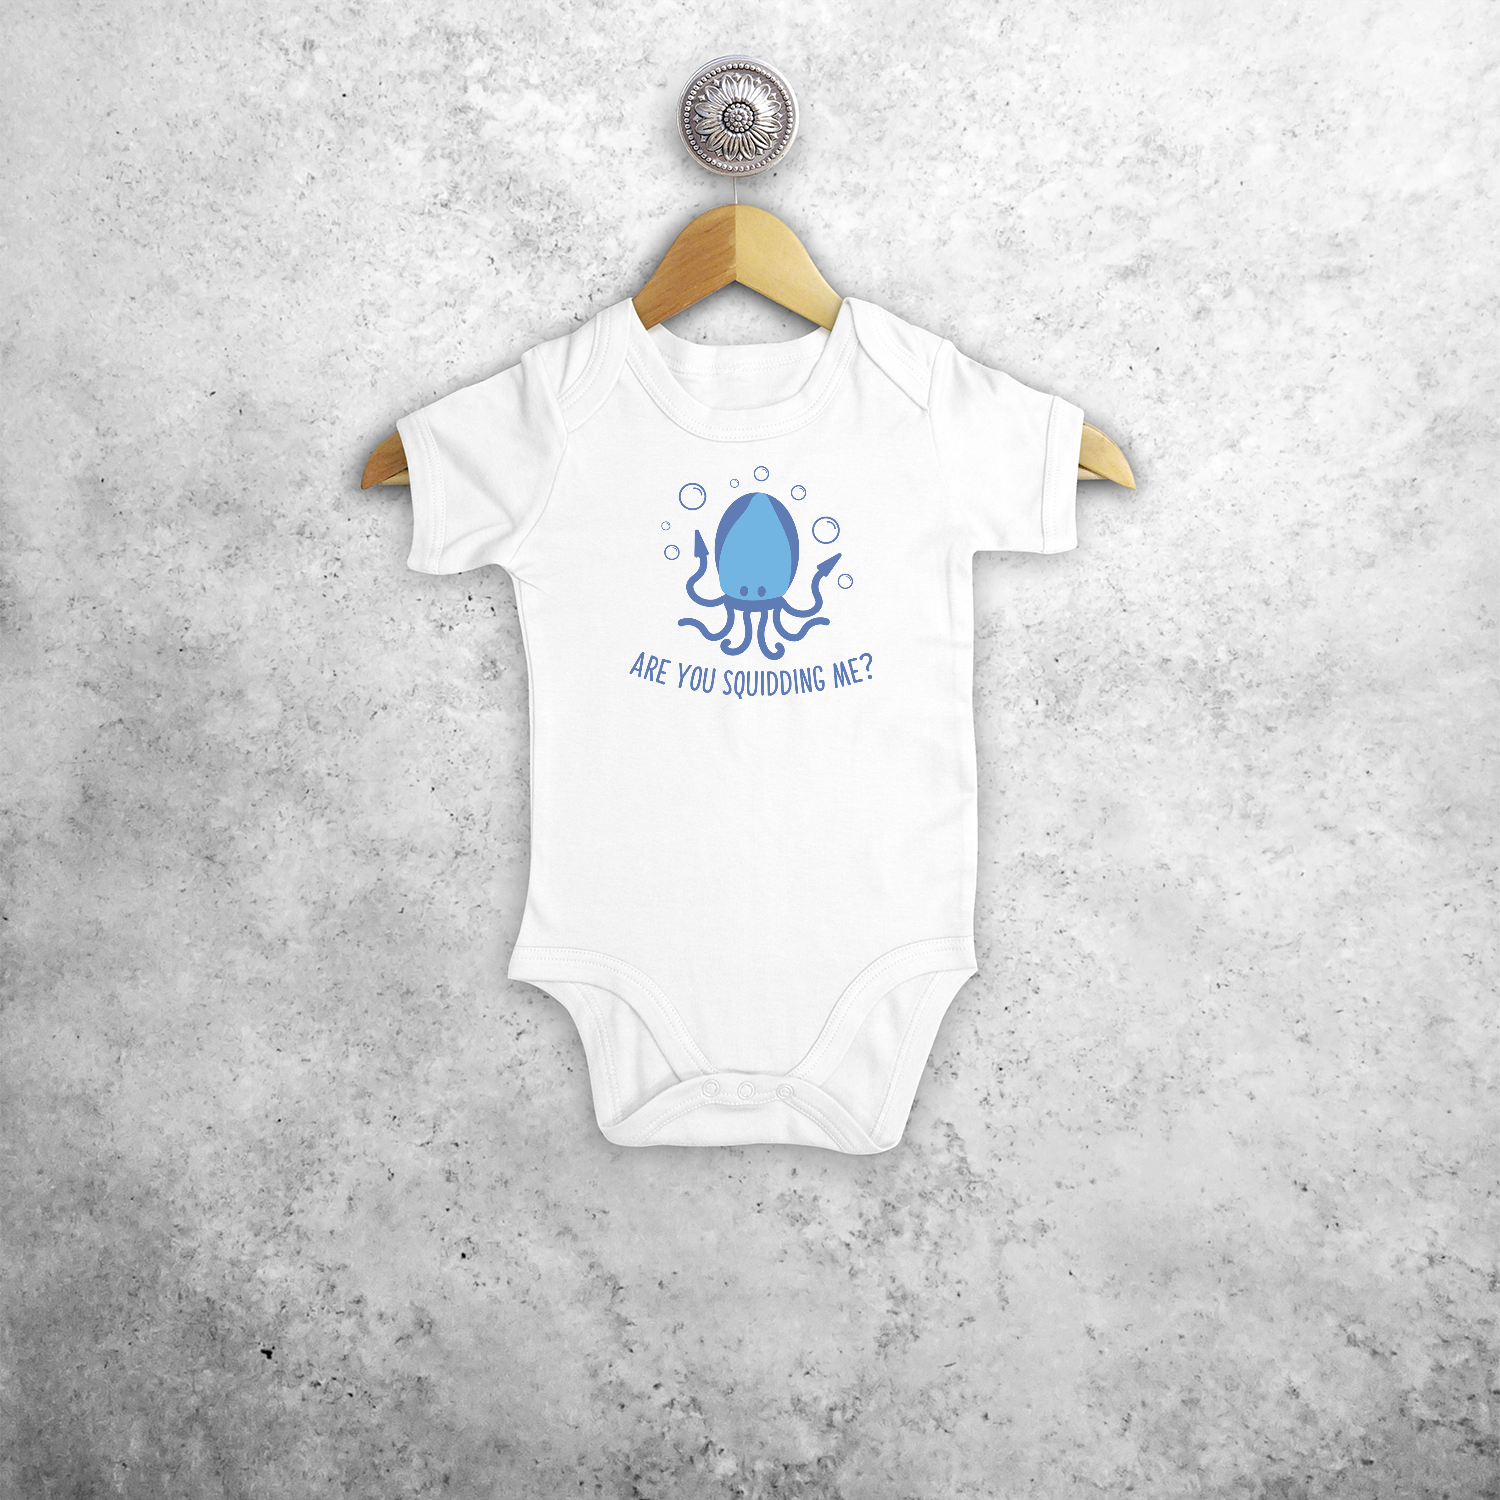 'Are you squidding me?' baby shortsleeve bodysuit